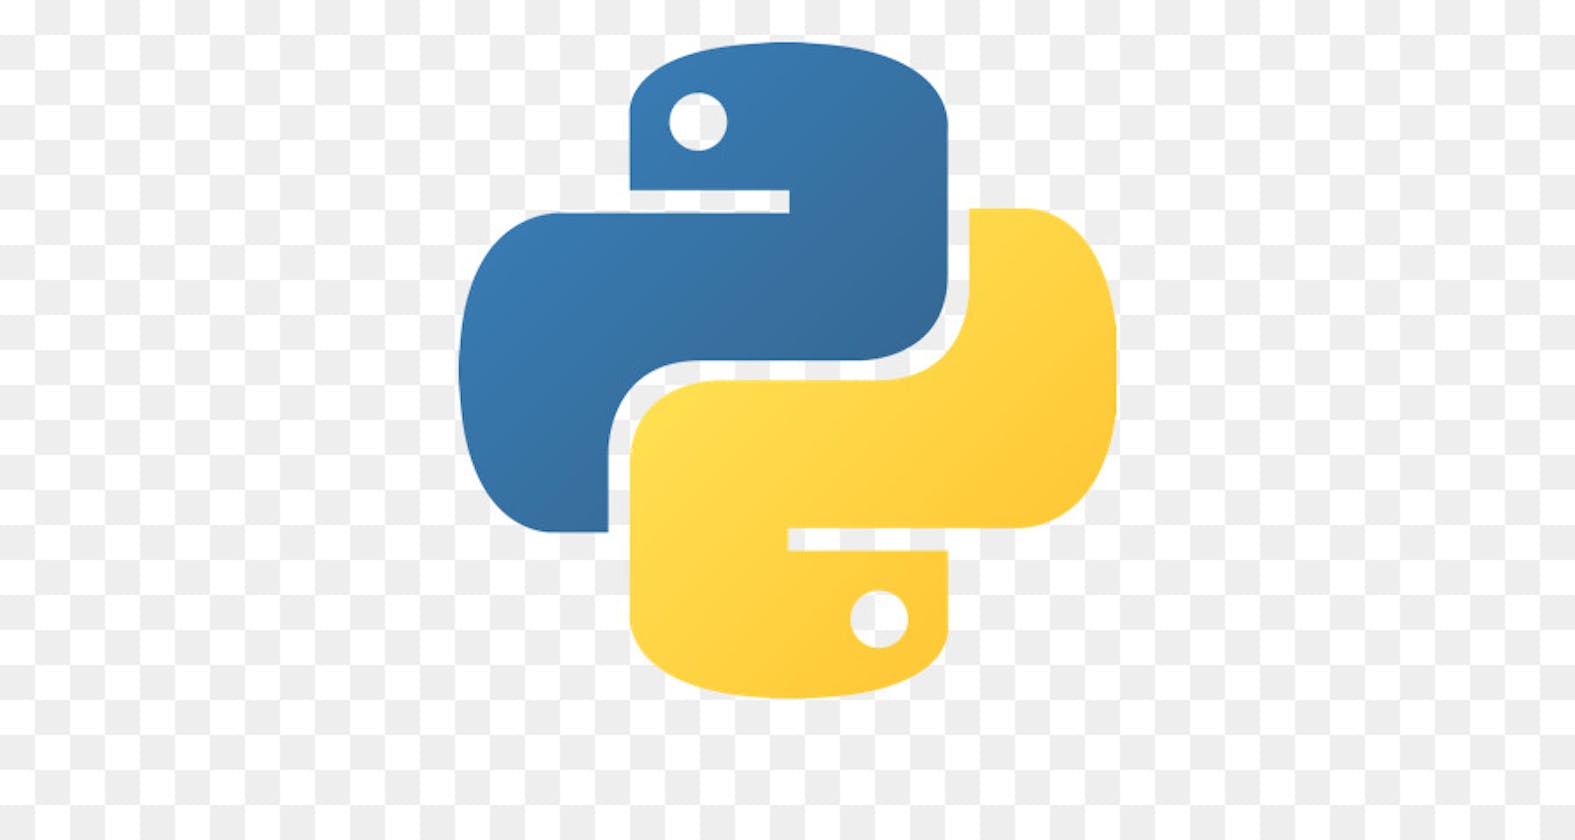 Complete Overview Of Encapsulation in Python